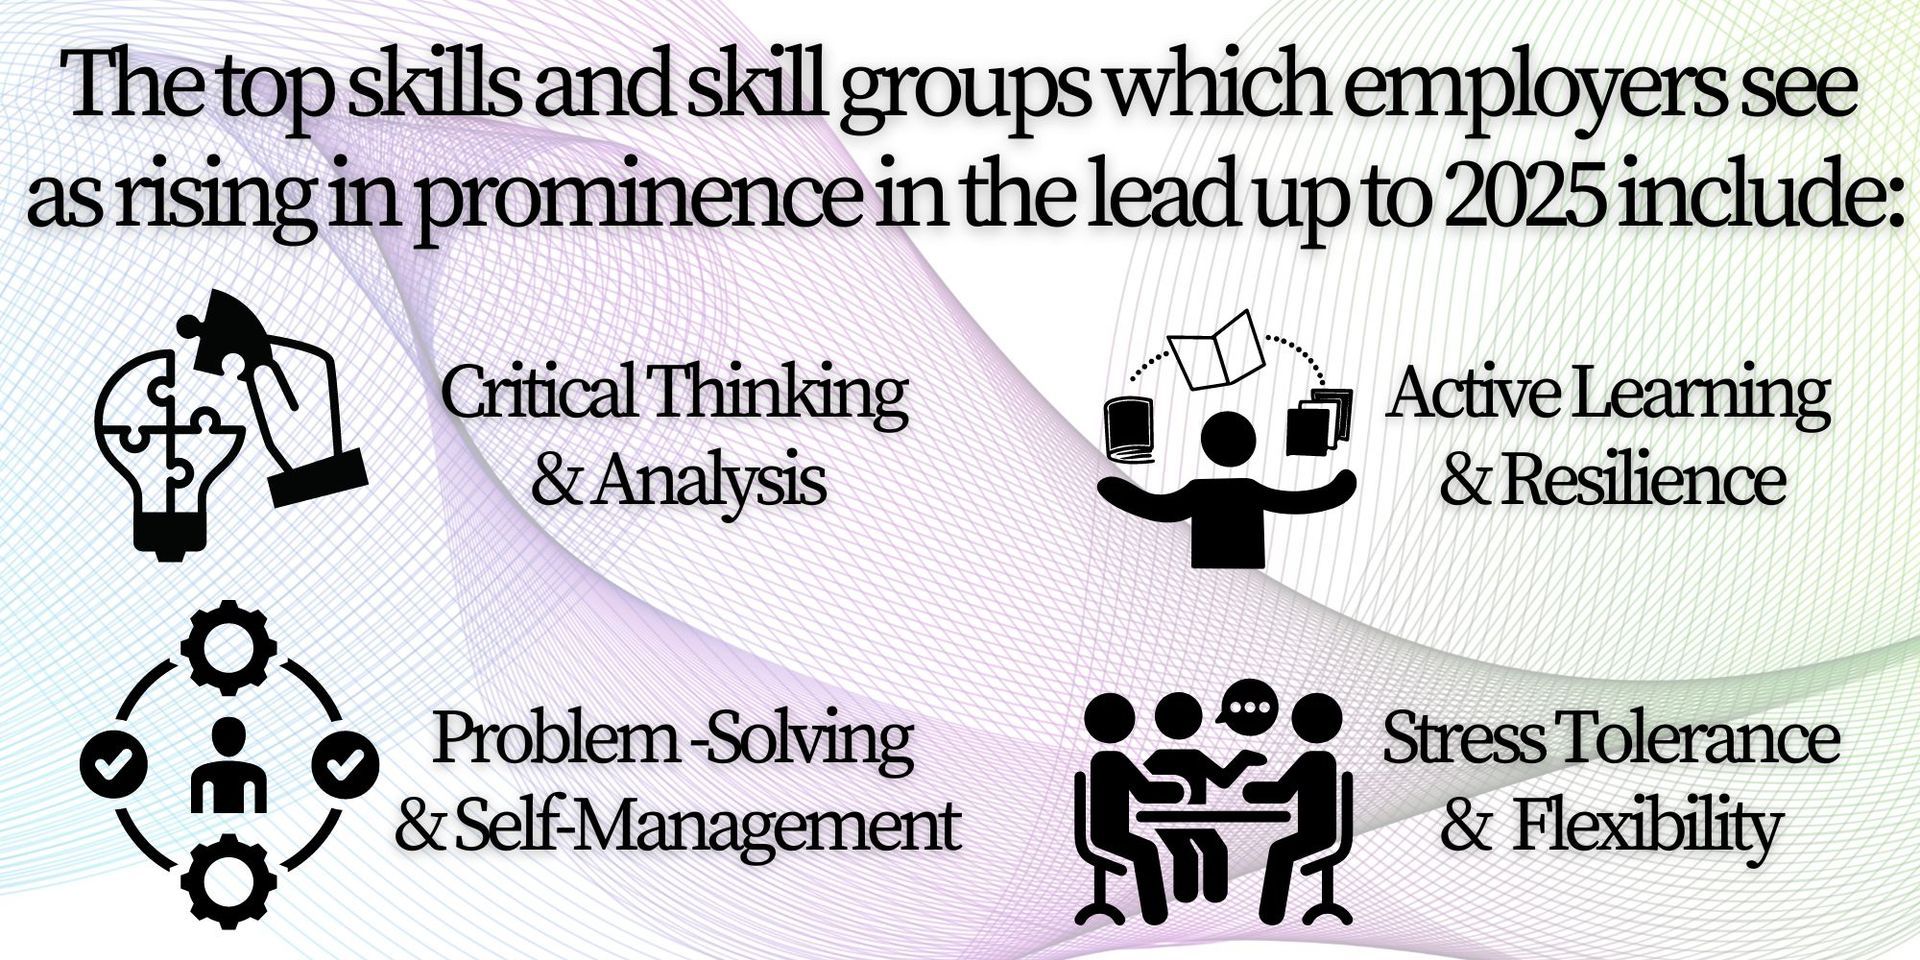 The top skills seen as rising in prominence in the lead-up to 2025 include Analysis, Problem-Solving, Self-Management, Active Learning, Resilience, Stress Tolerance, and Flexibility.